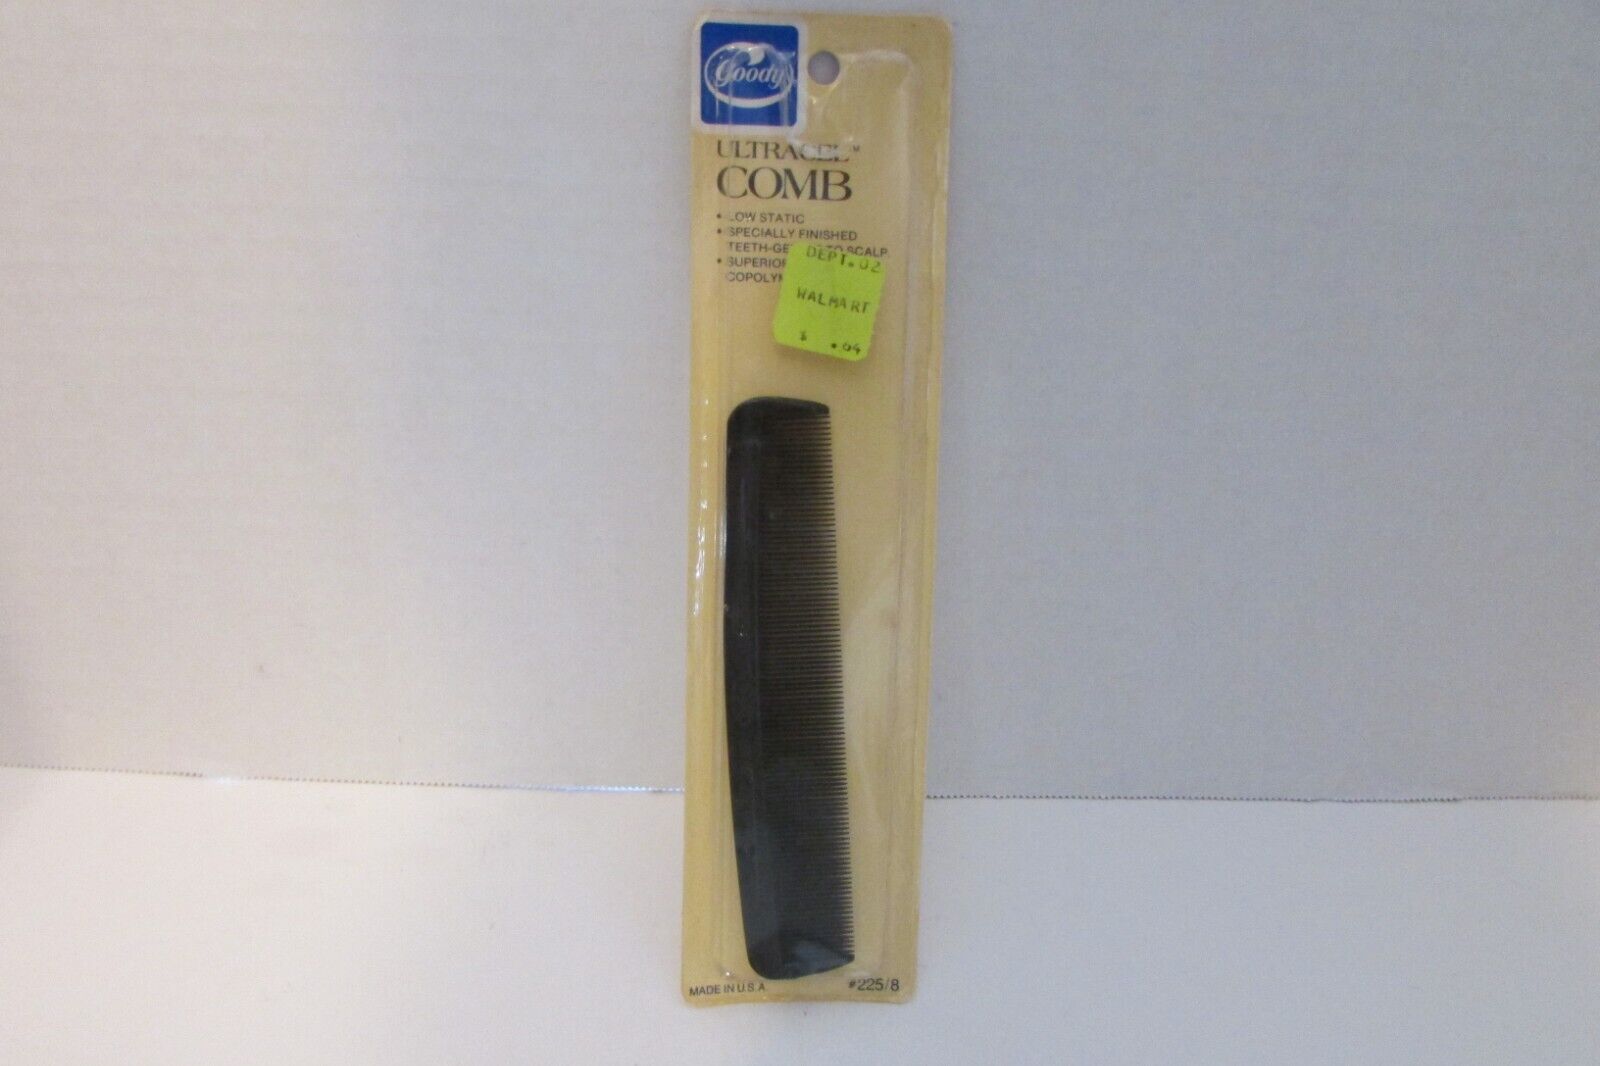 VTG Goody Ultracel Black Comb #225/8 Made in USA NOS on Card 1985